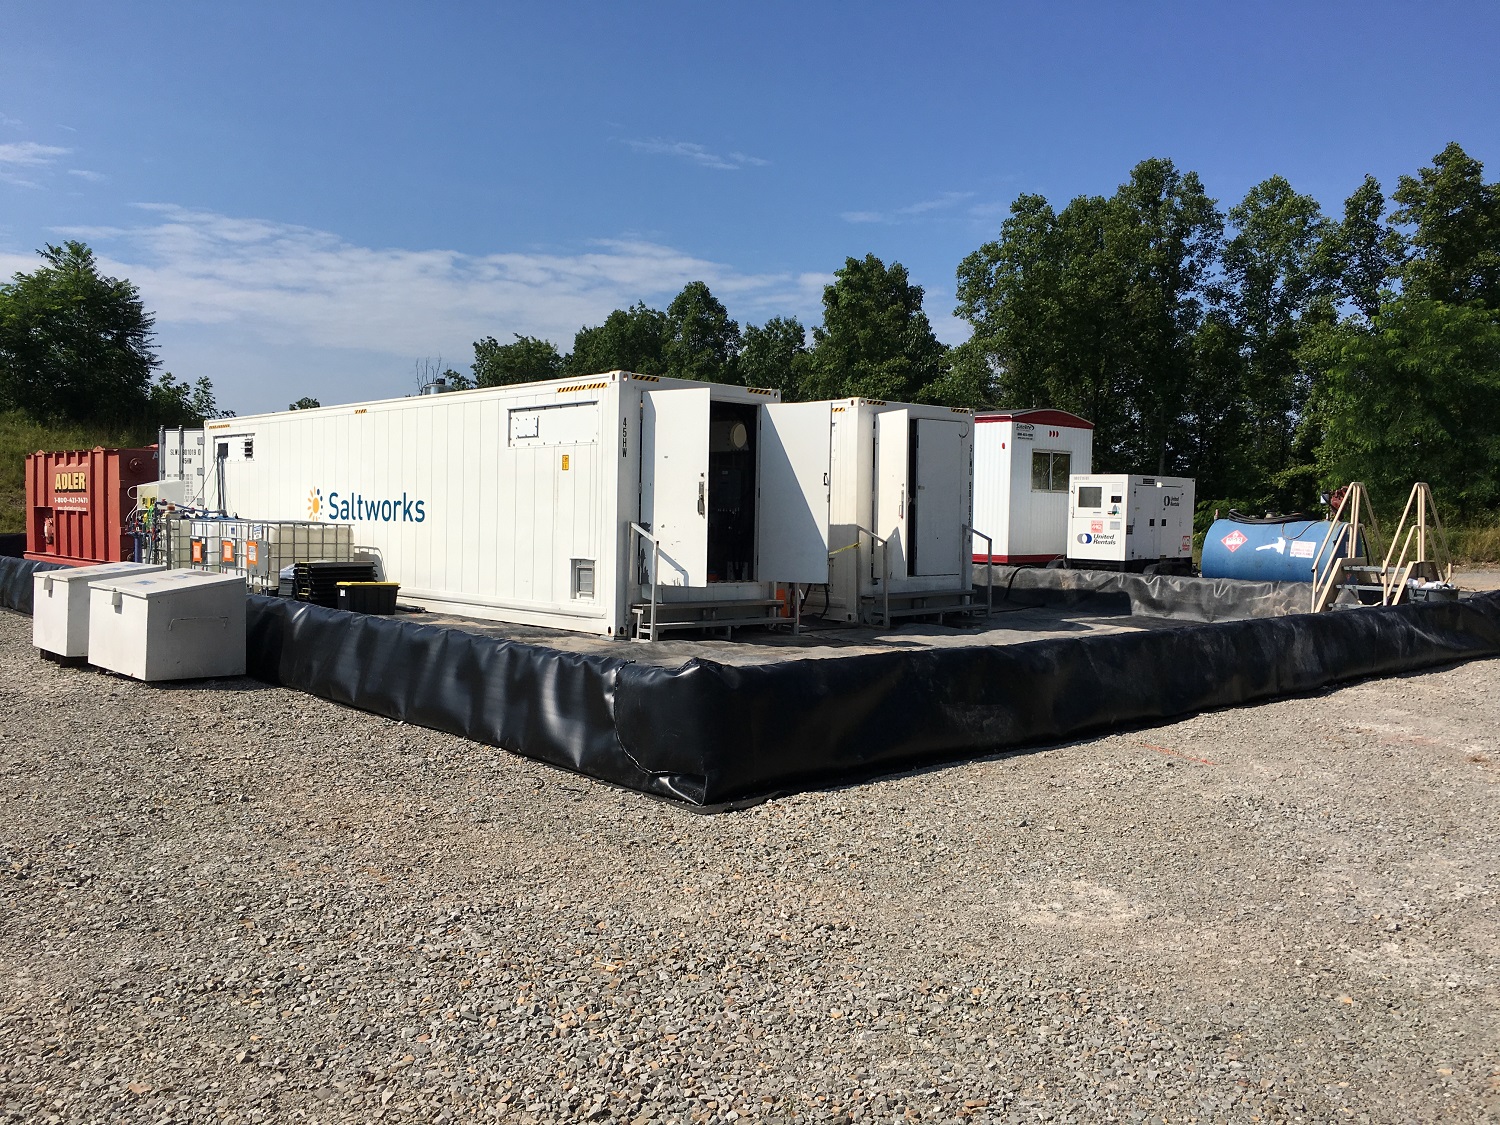 Saltworks’ AirBreather technology has been used in a new shale water evaporation system.